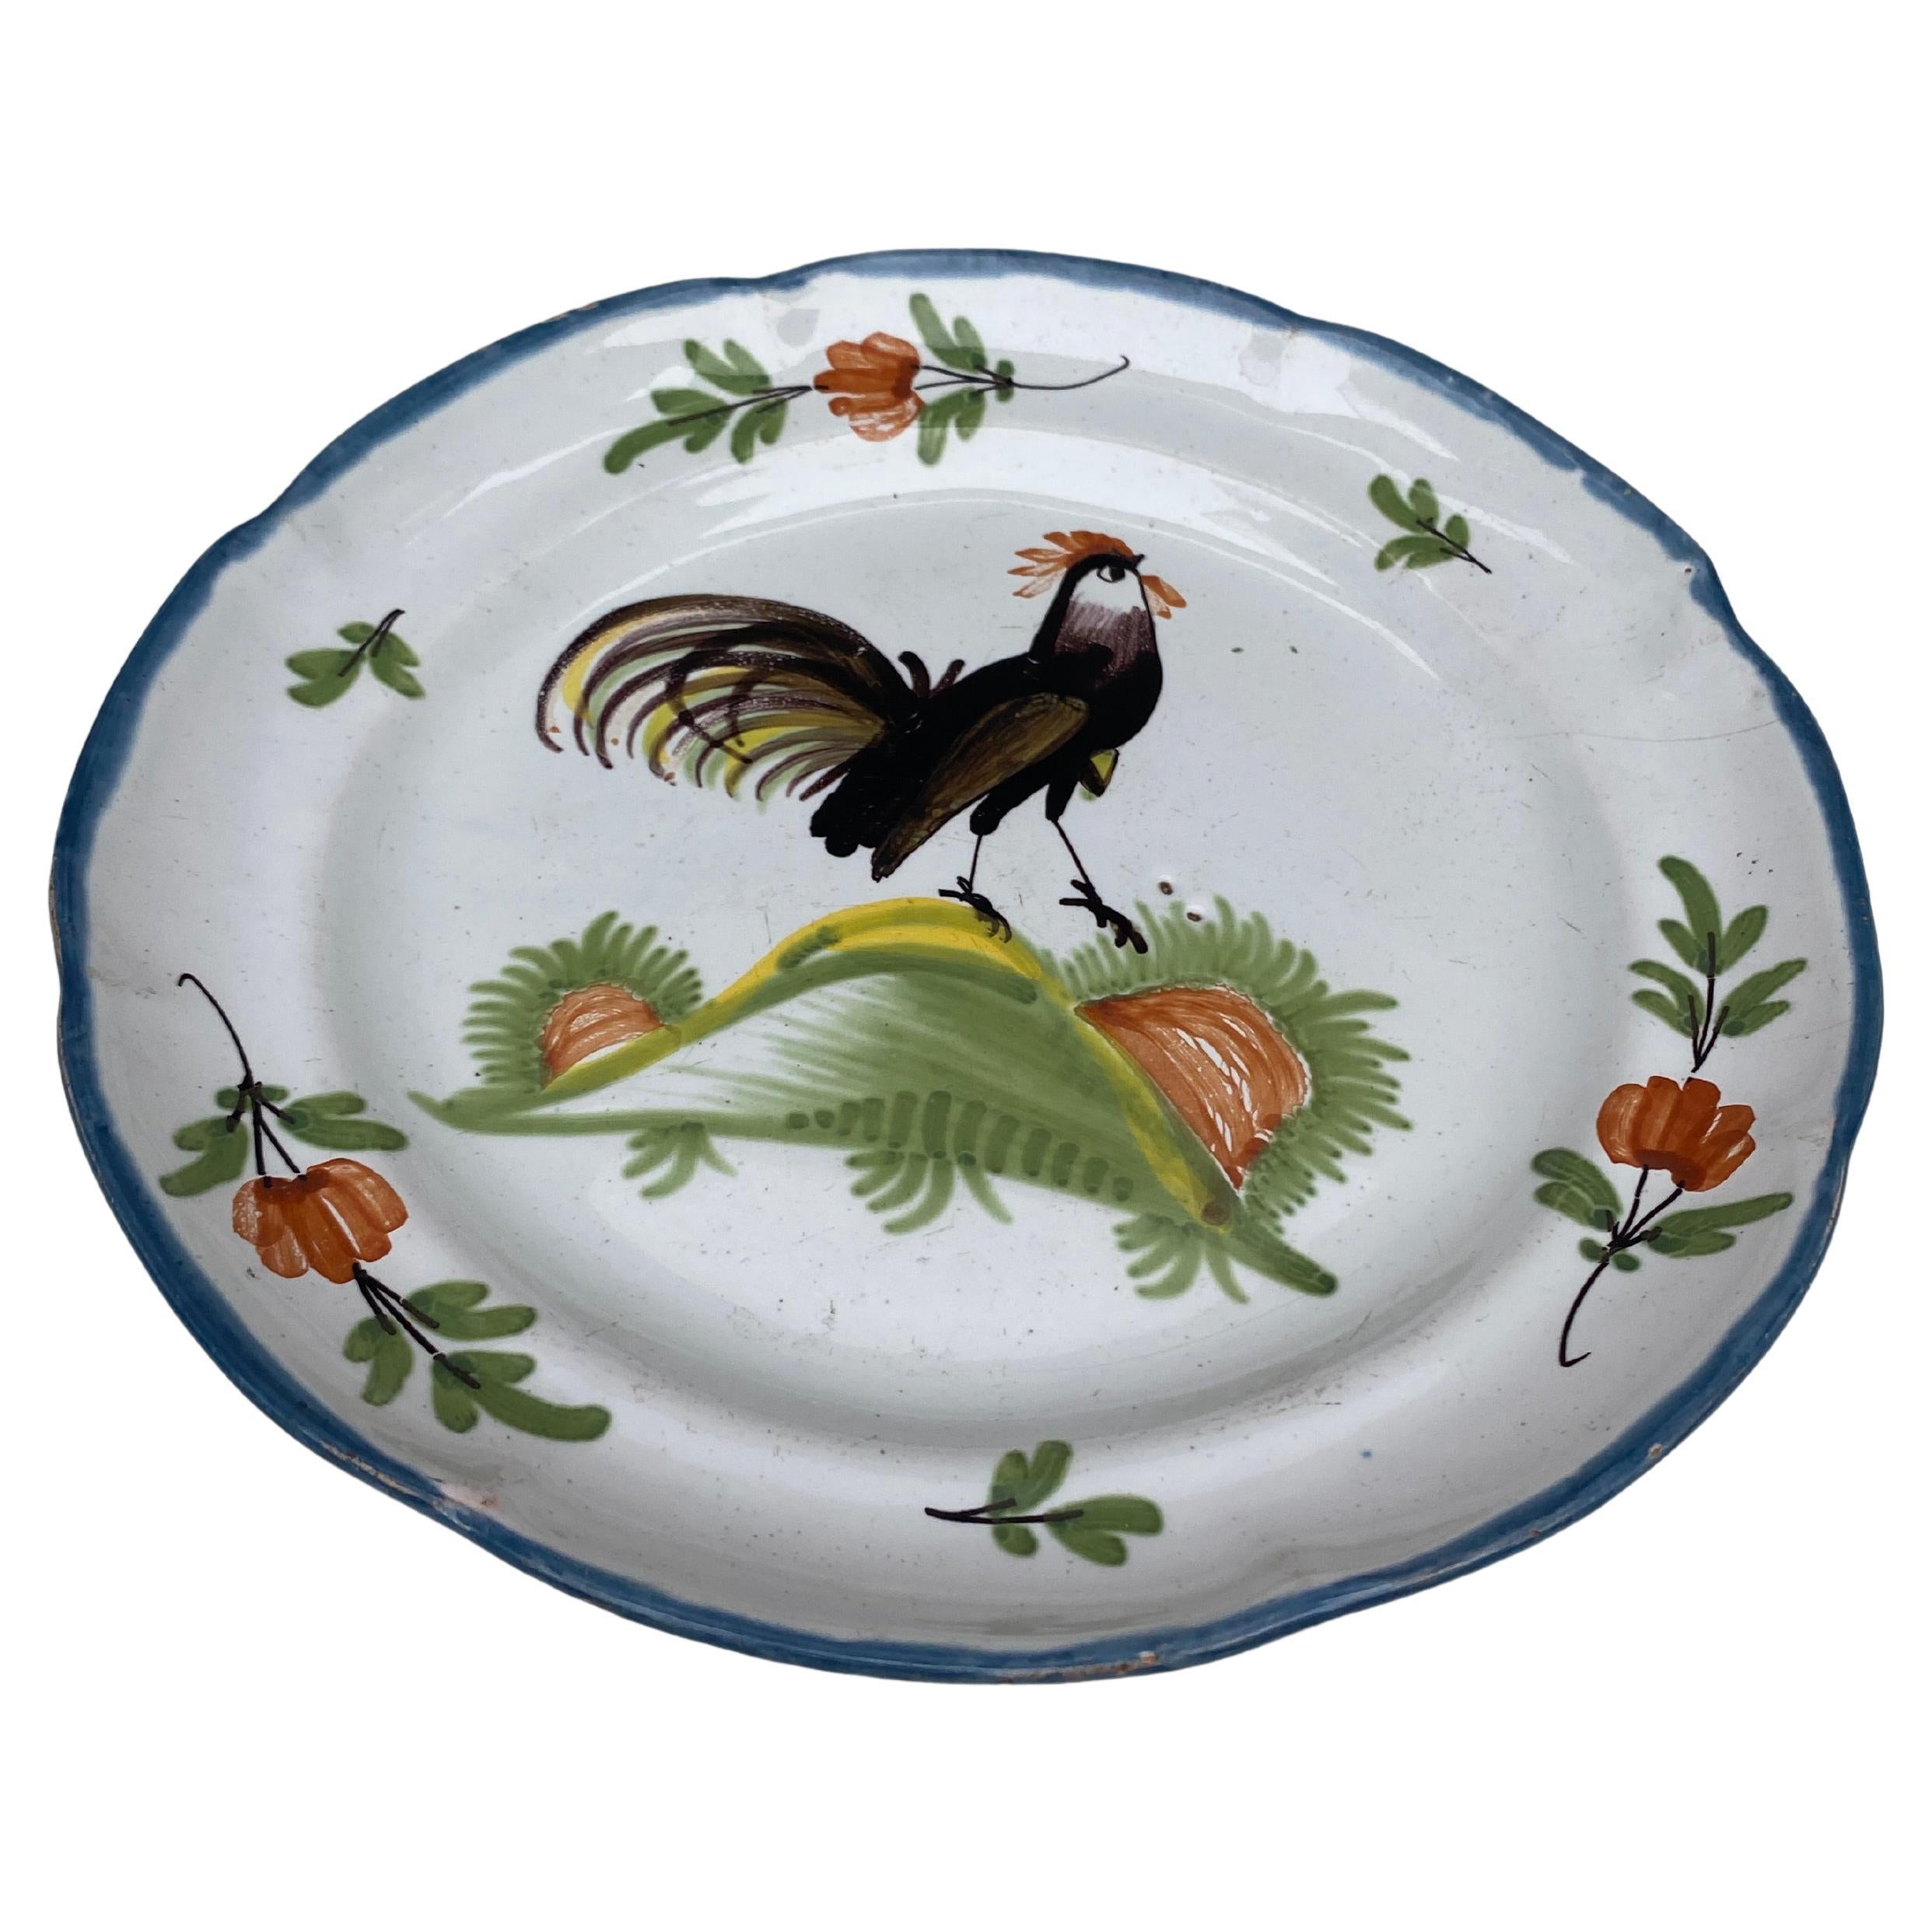 19th Century French Rustic Faience Rooster Plate.
 